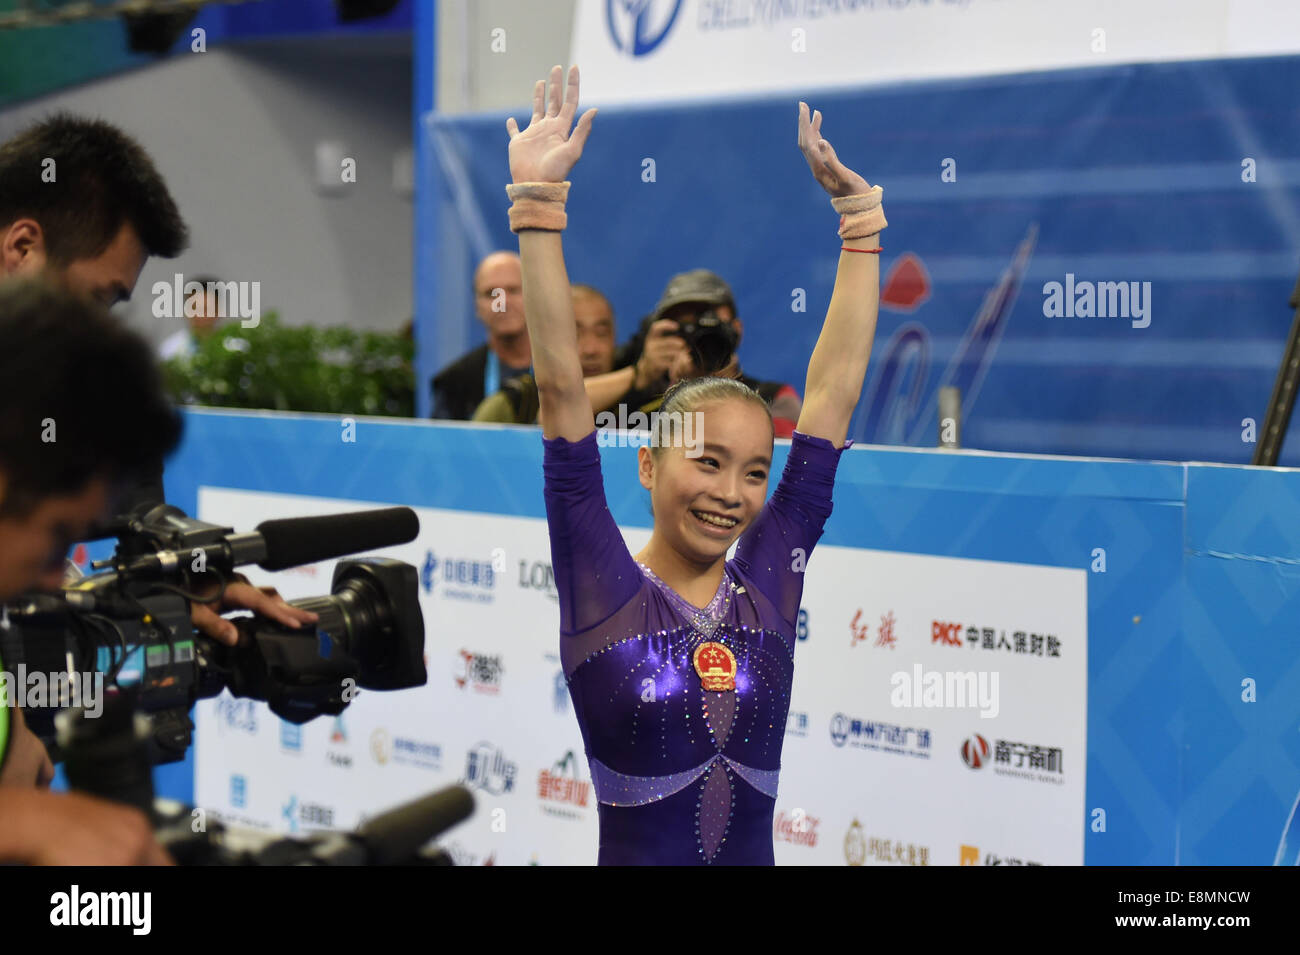 Nanning, China's Guangxi Zhuang Autonomous Region. 11th Oct, 2014. Chinese gymnast Yao Jinnan smiles after her uneven bars performance during the women's individual apparatus finals of the 45th Gymnastics World Championships in Nanning, capital of south China's Guangxi Zhuang Autonomous Region, Oct. 11, 2014. Yao Jinnan won the gold medal in the women's uneven bars final with 15.633 points. Credit:  Yang Zongyou/Xinhua/Alamy Live News Stock Photo